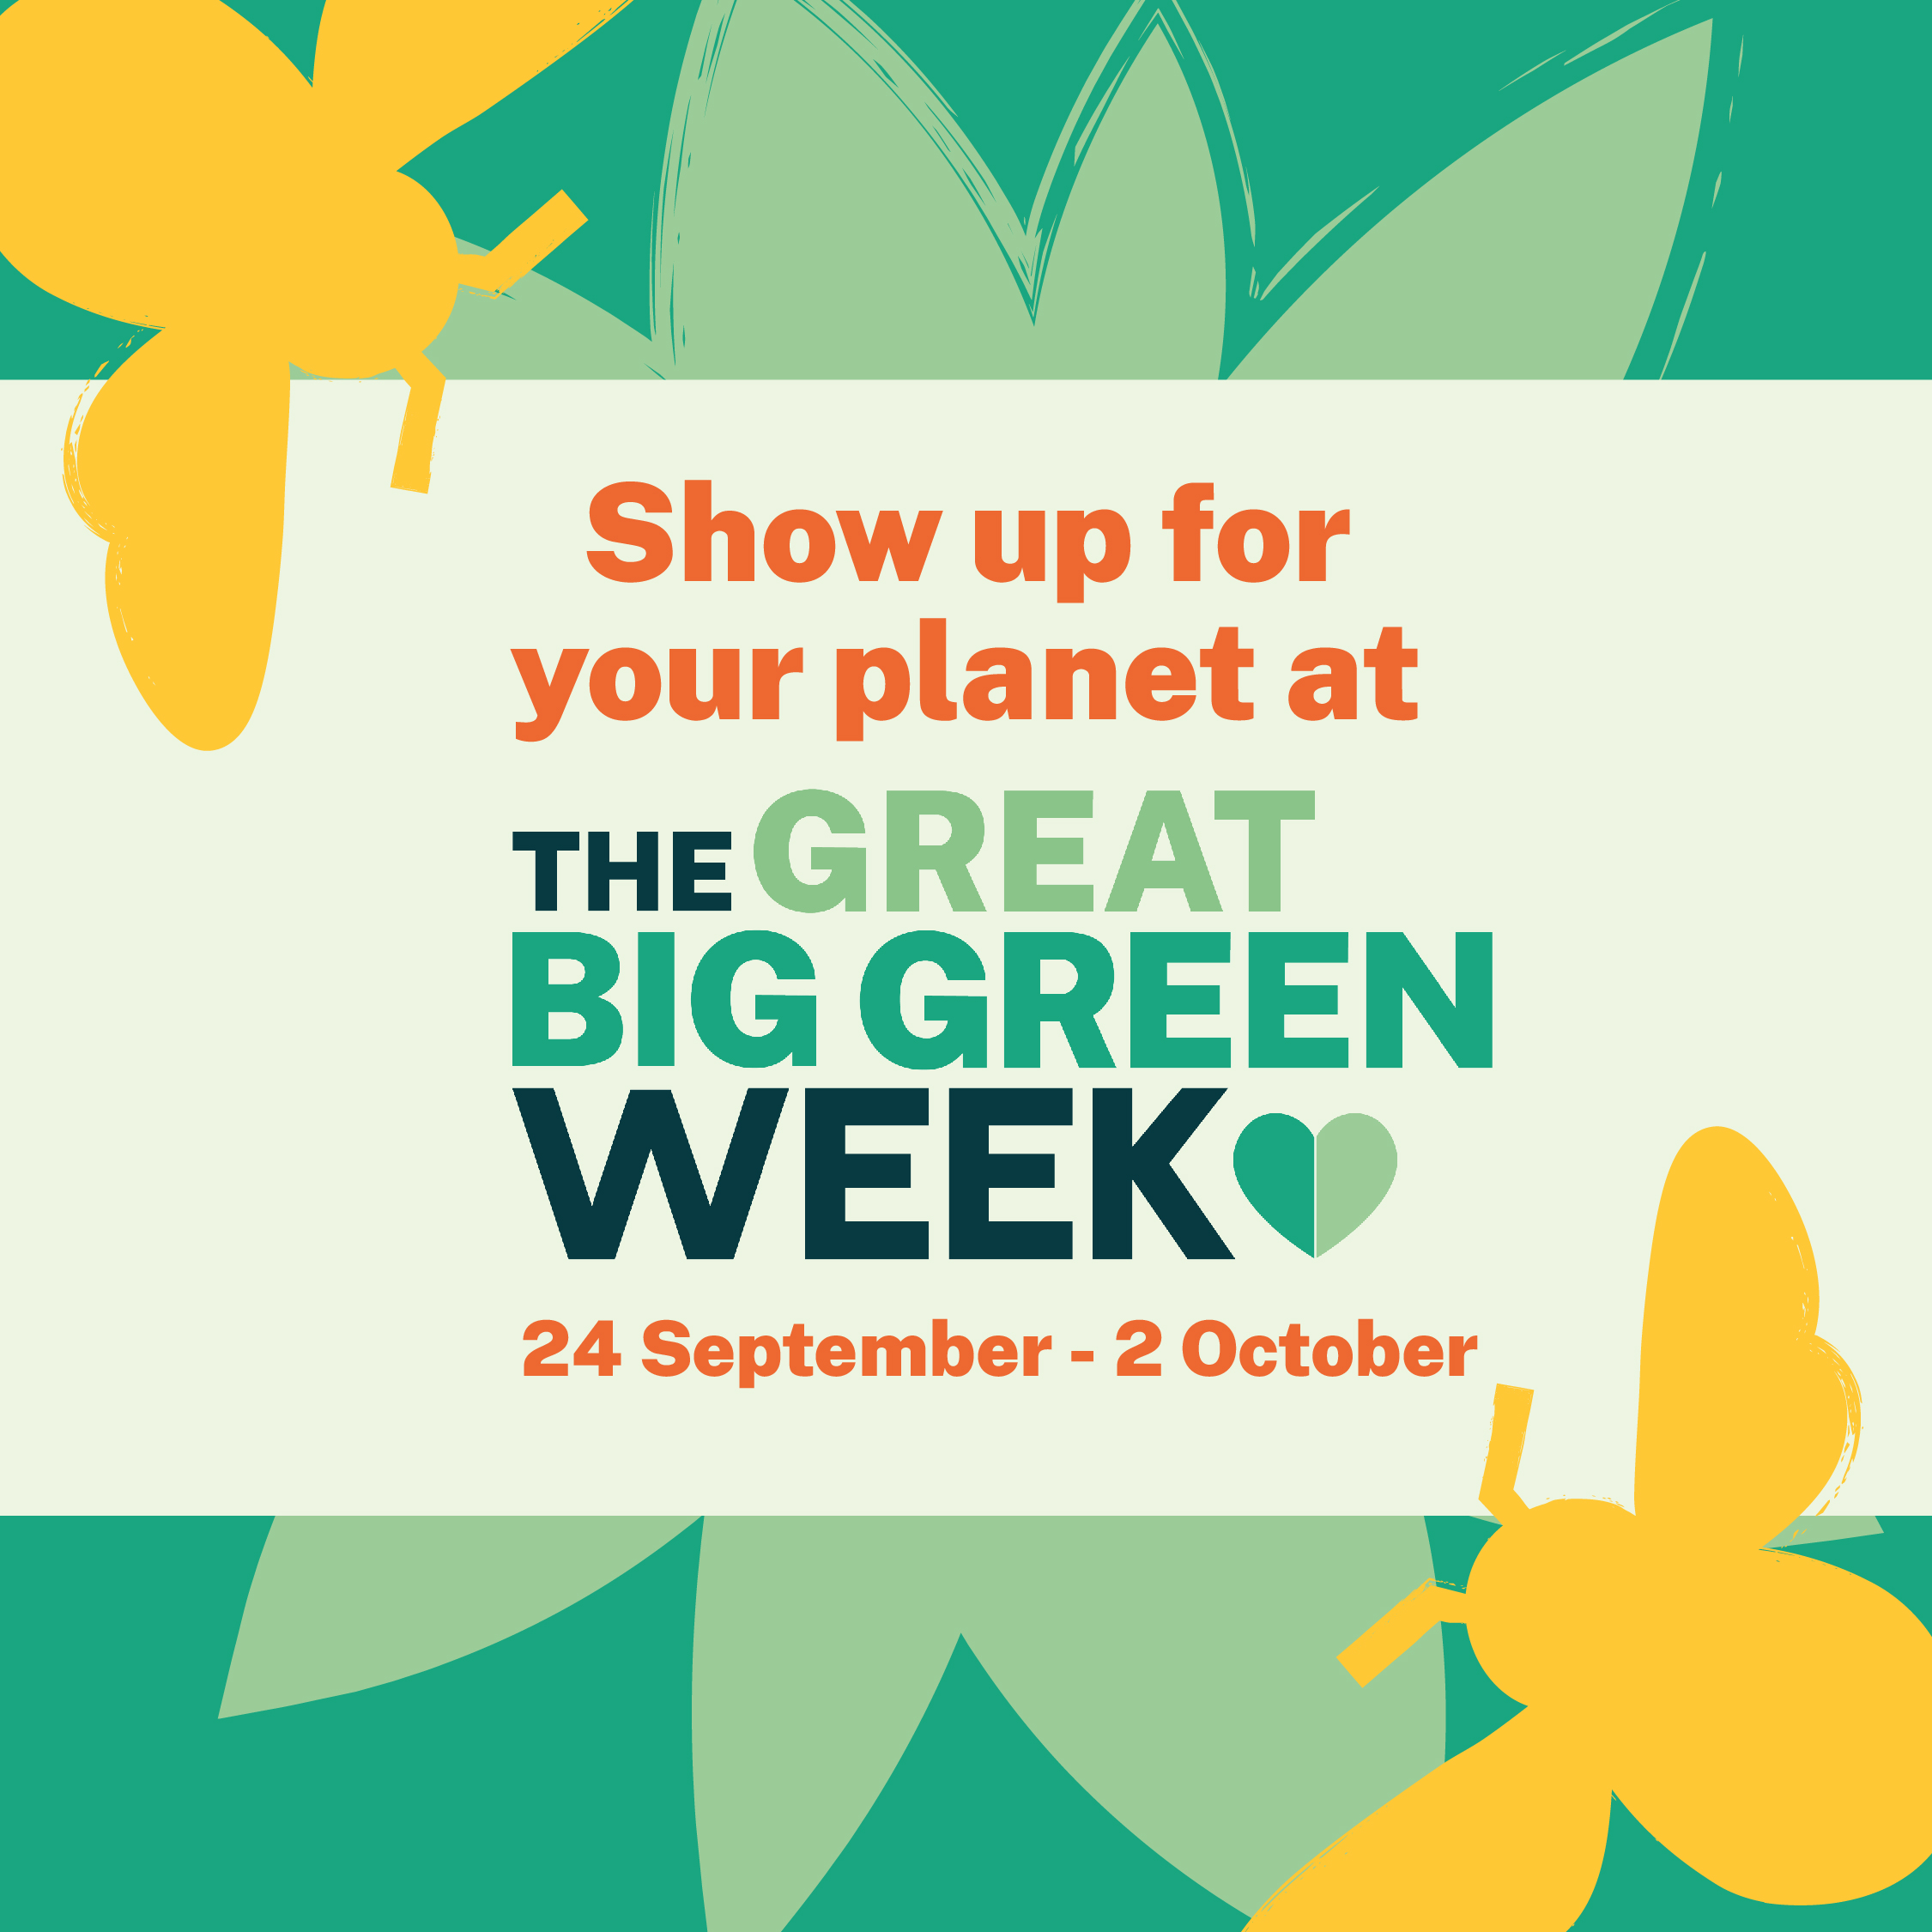 We are taking part in The Great Big Green Week